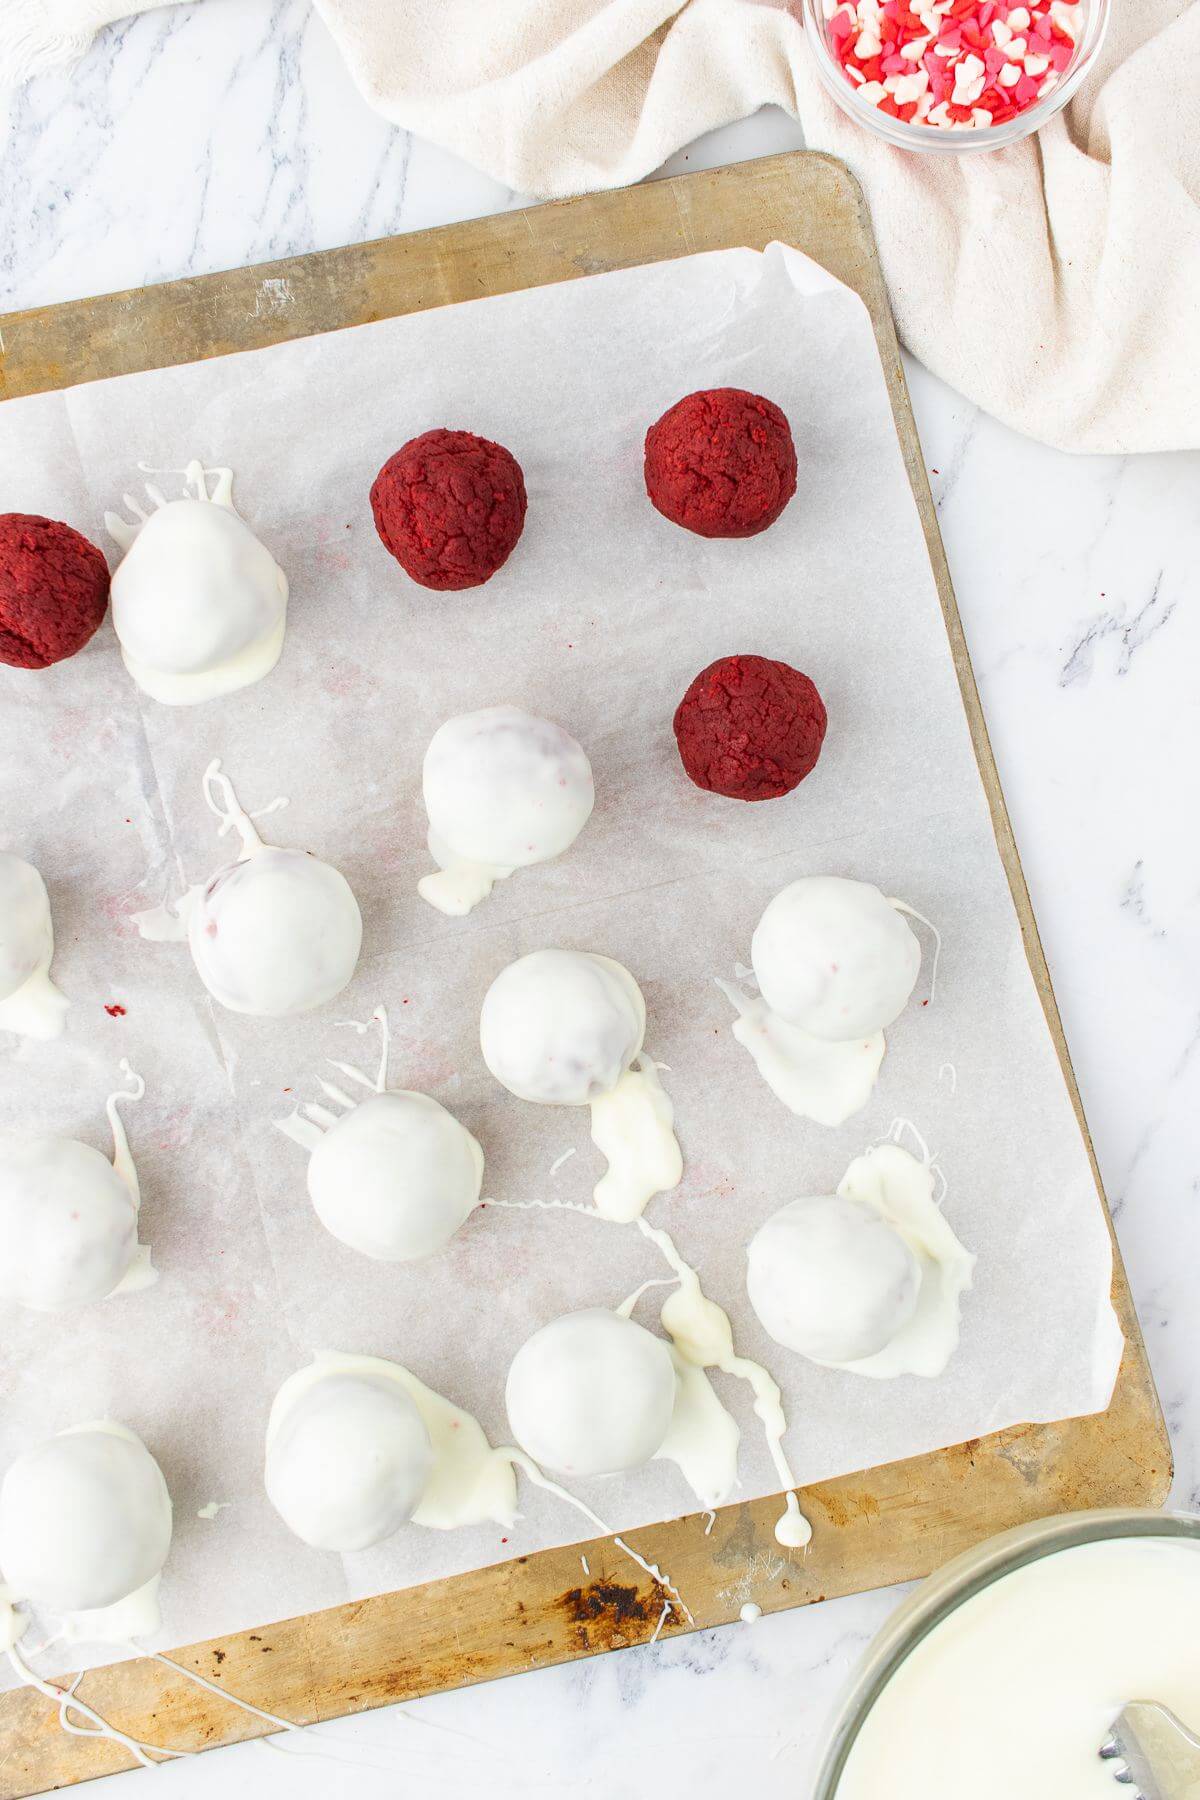 A baking sheet is covered with cake pops, mostly iced in white with a few uniced too.